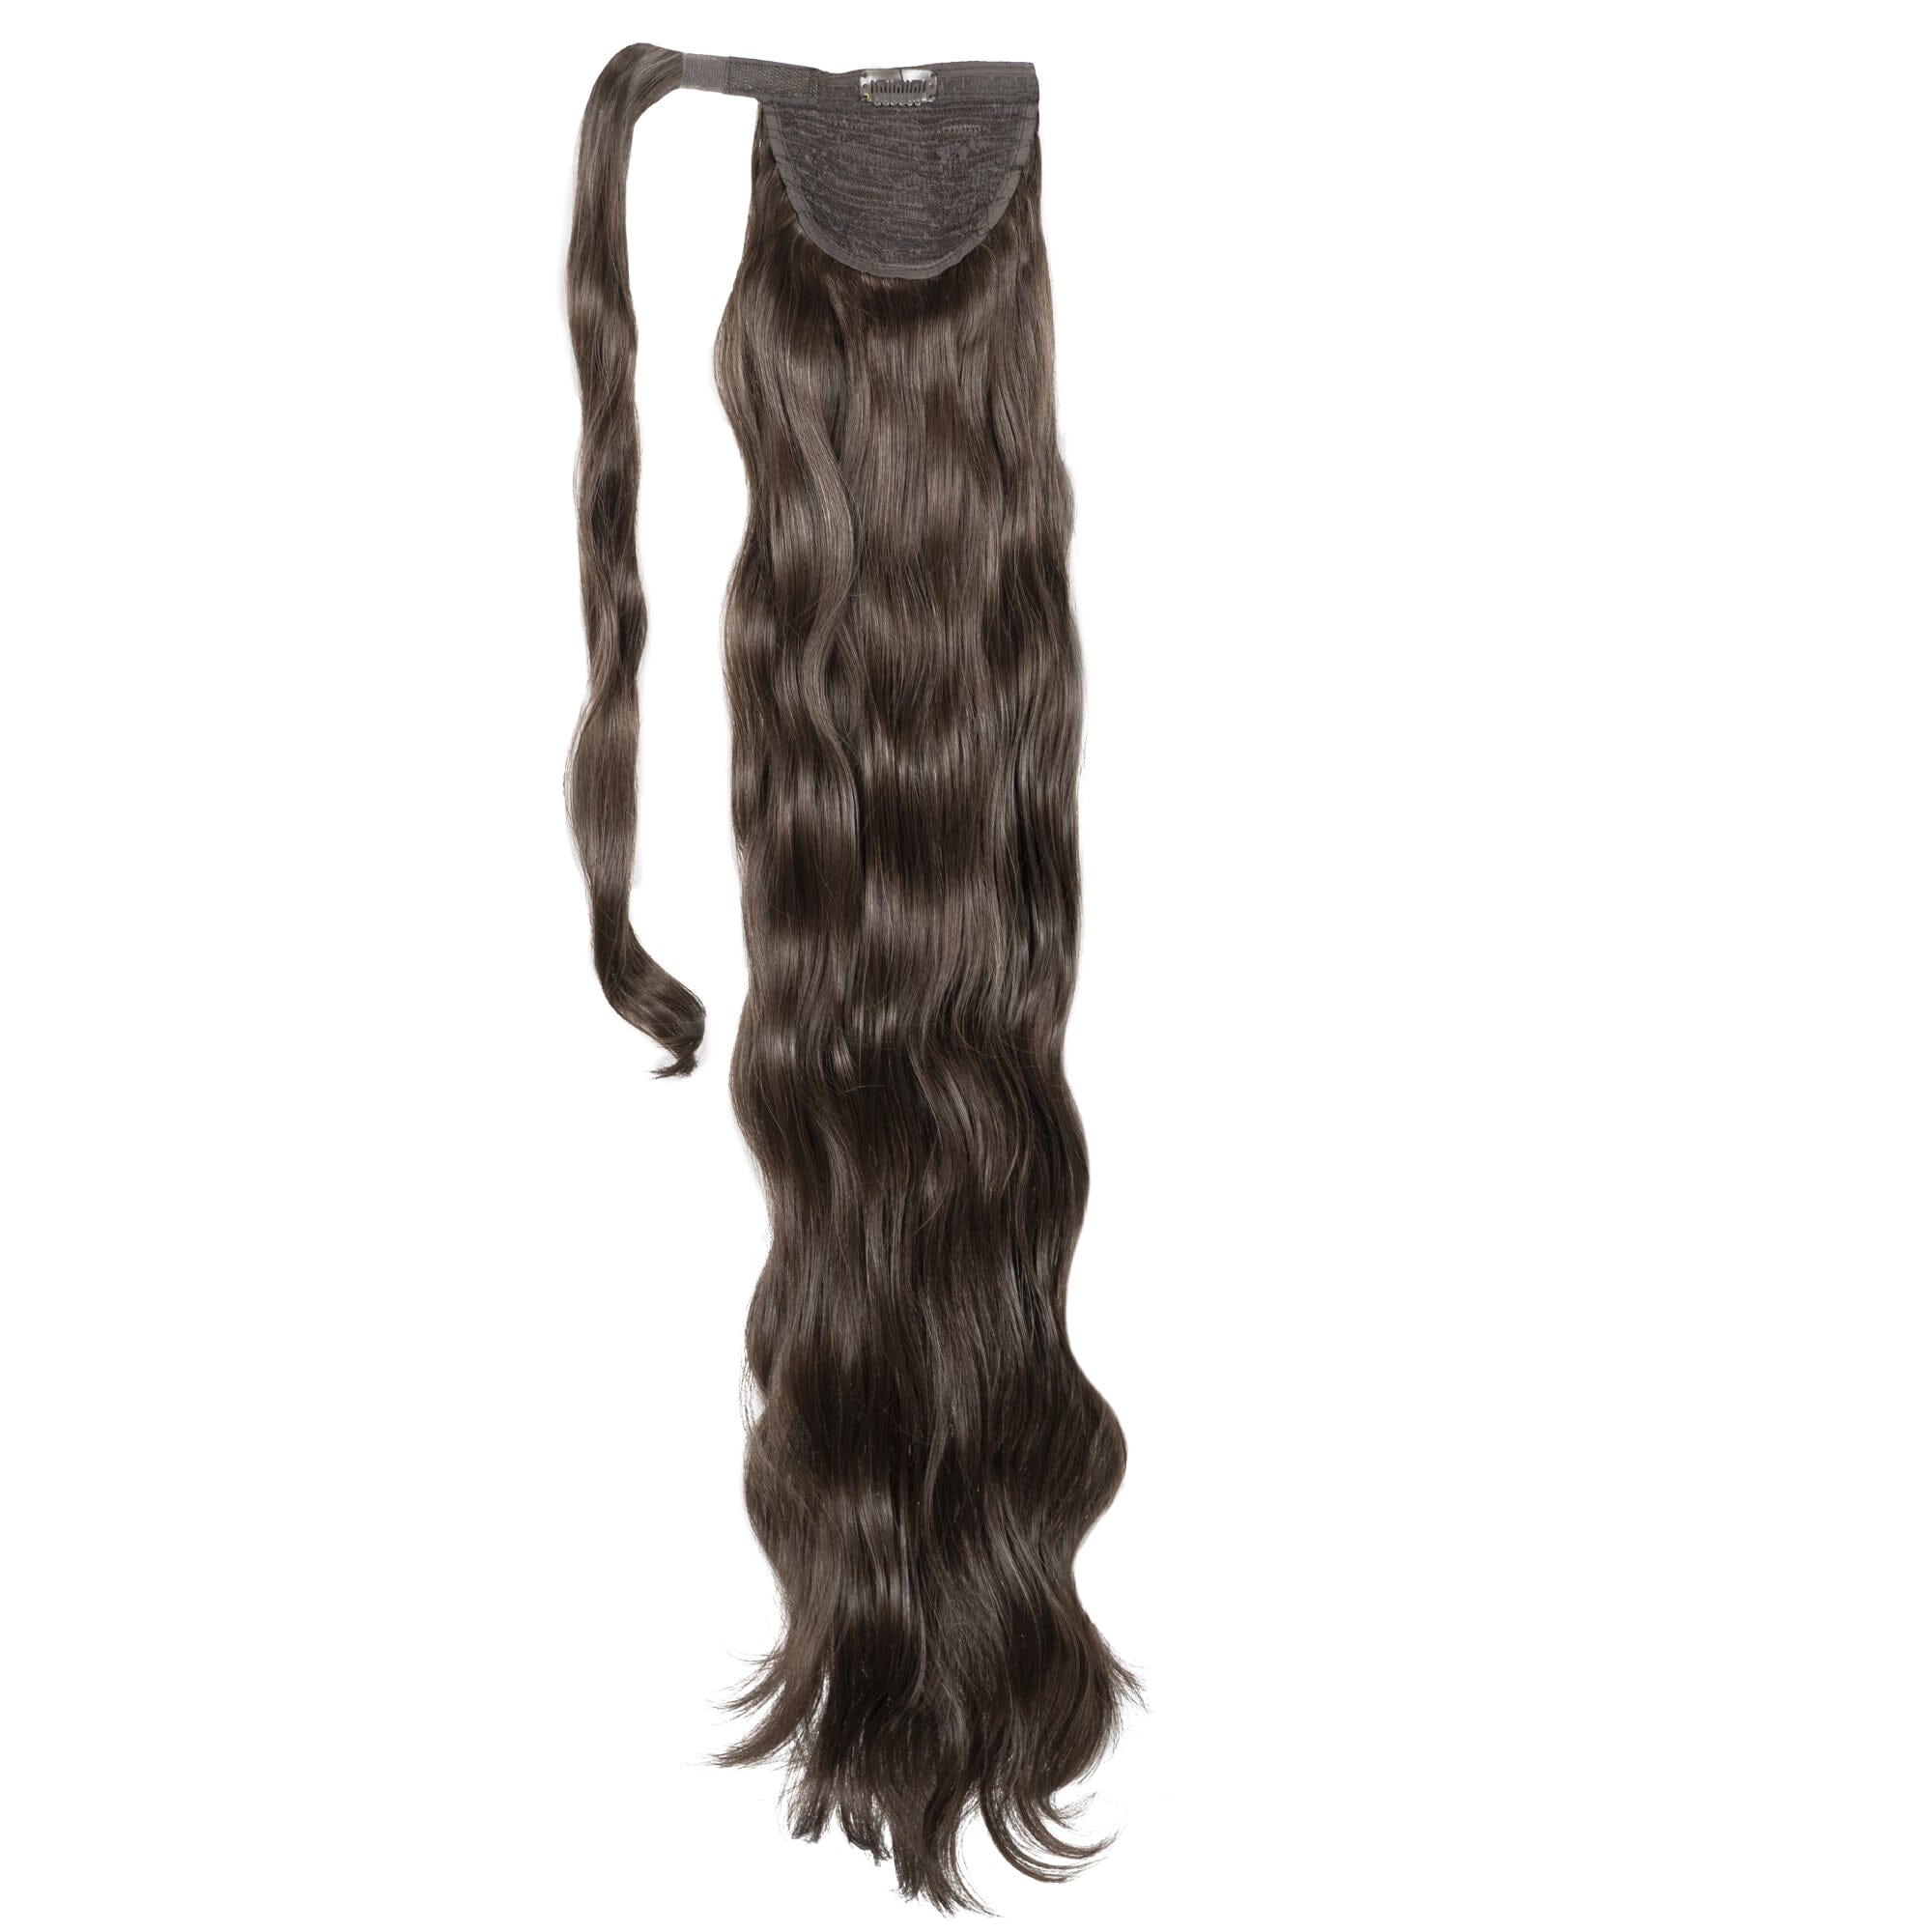 Long Clip-In Ponytails (22" - 30") Clip In Ponytail Easilocks 30"Body Wave Clip-In Ponytail Brown Cocoa 